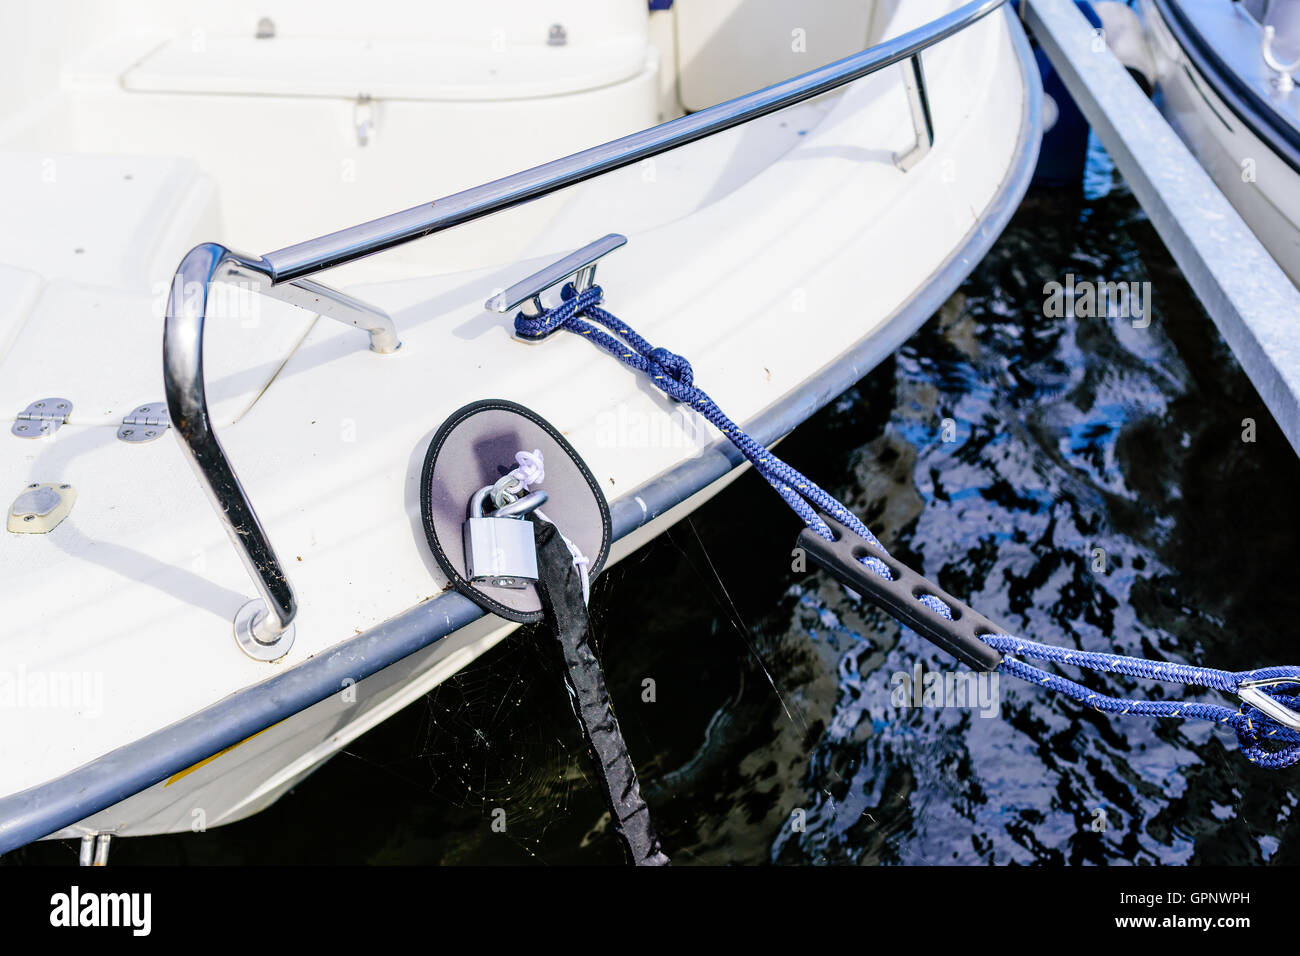 Padlock and covered chain secure the boat from random theft. Stock Photo